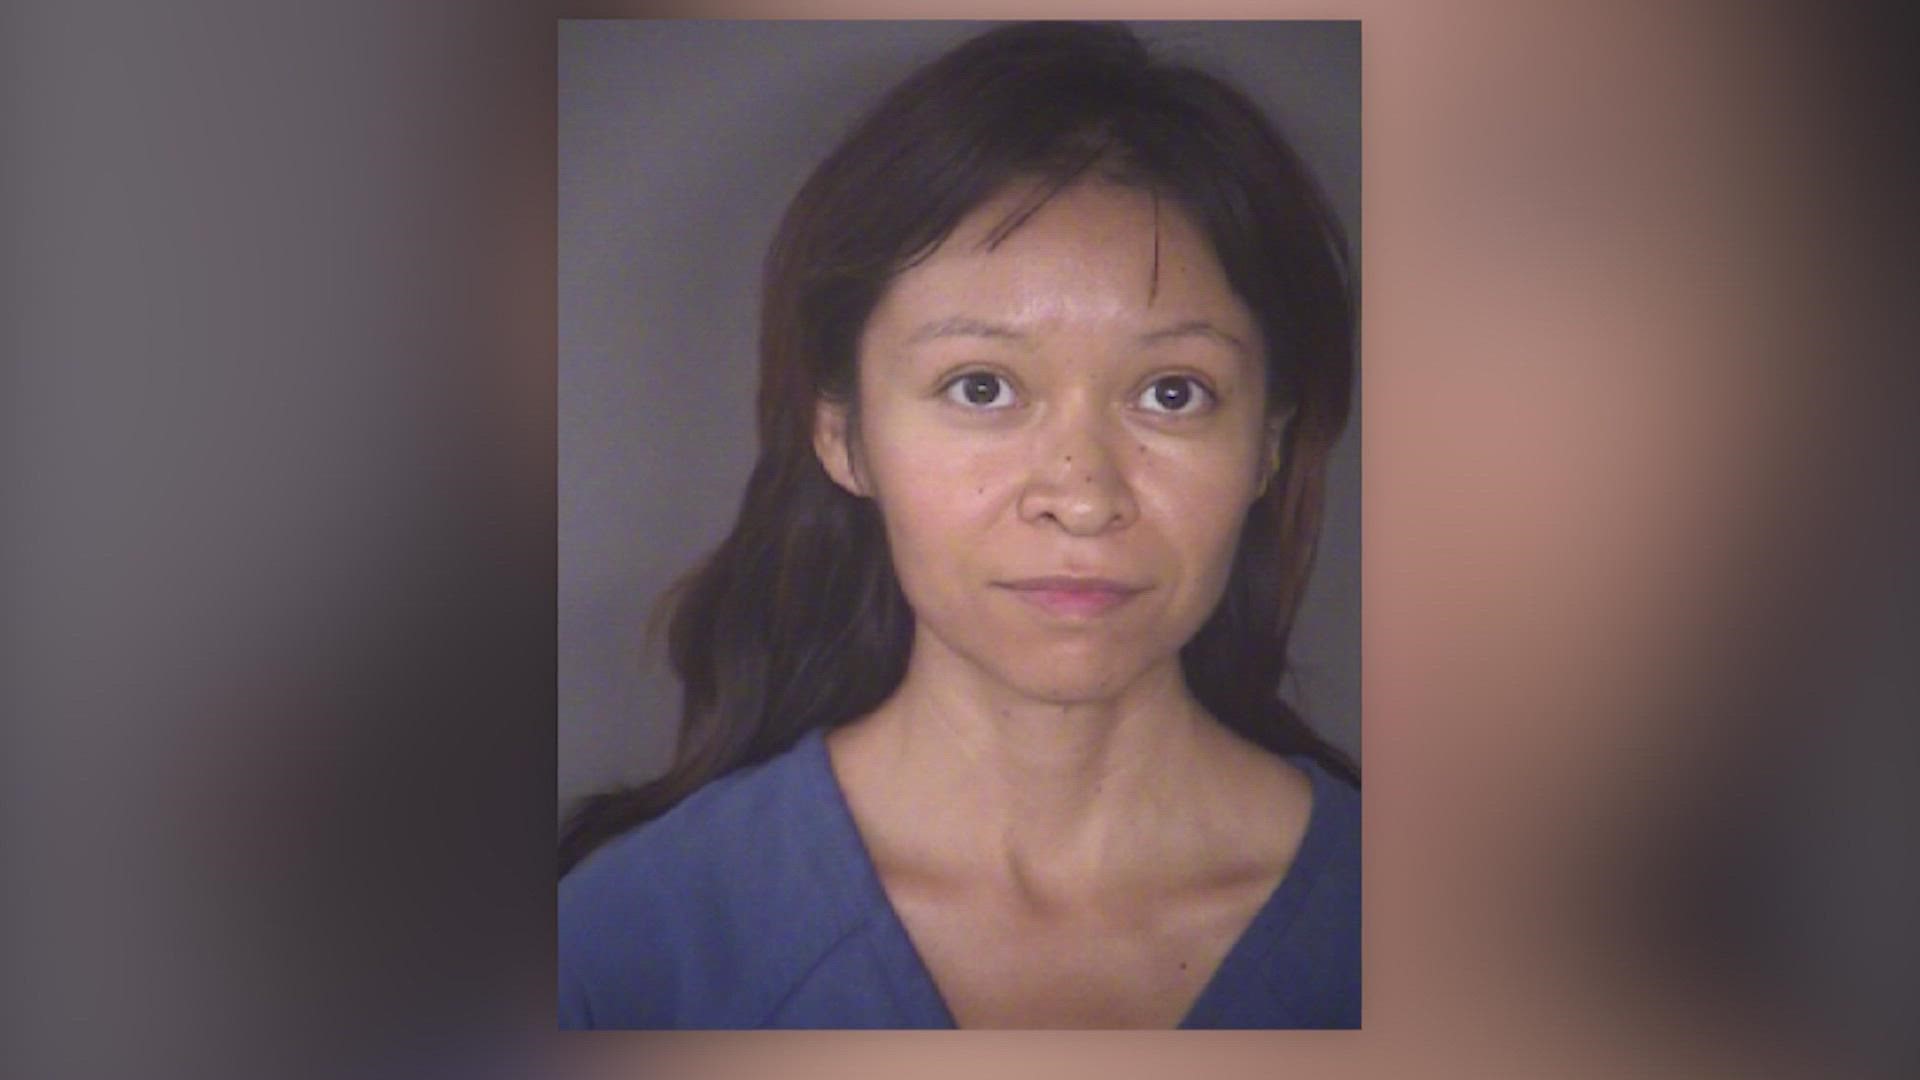 Jessica Briones is charged with her child's death in September 2017.